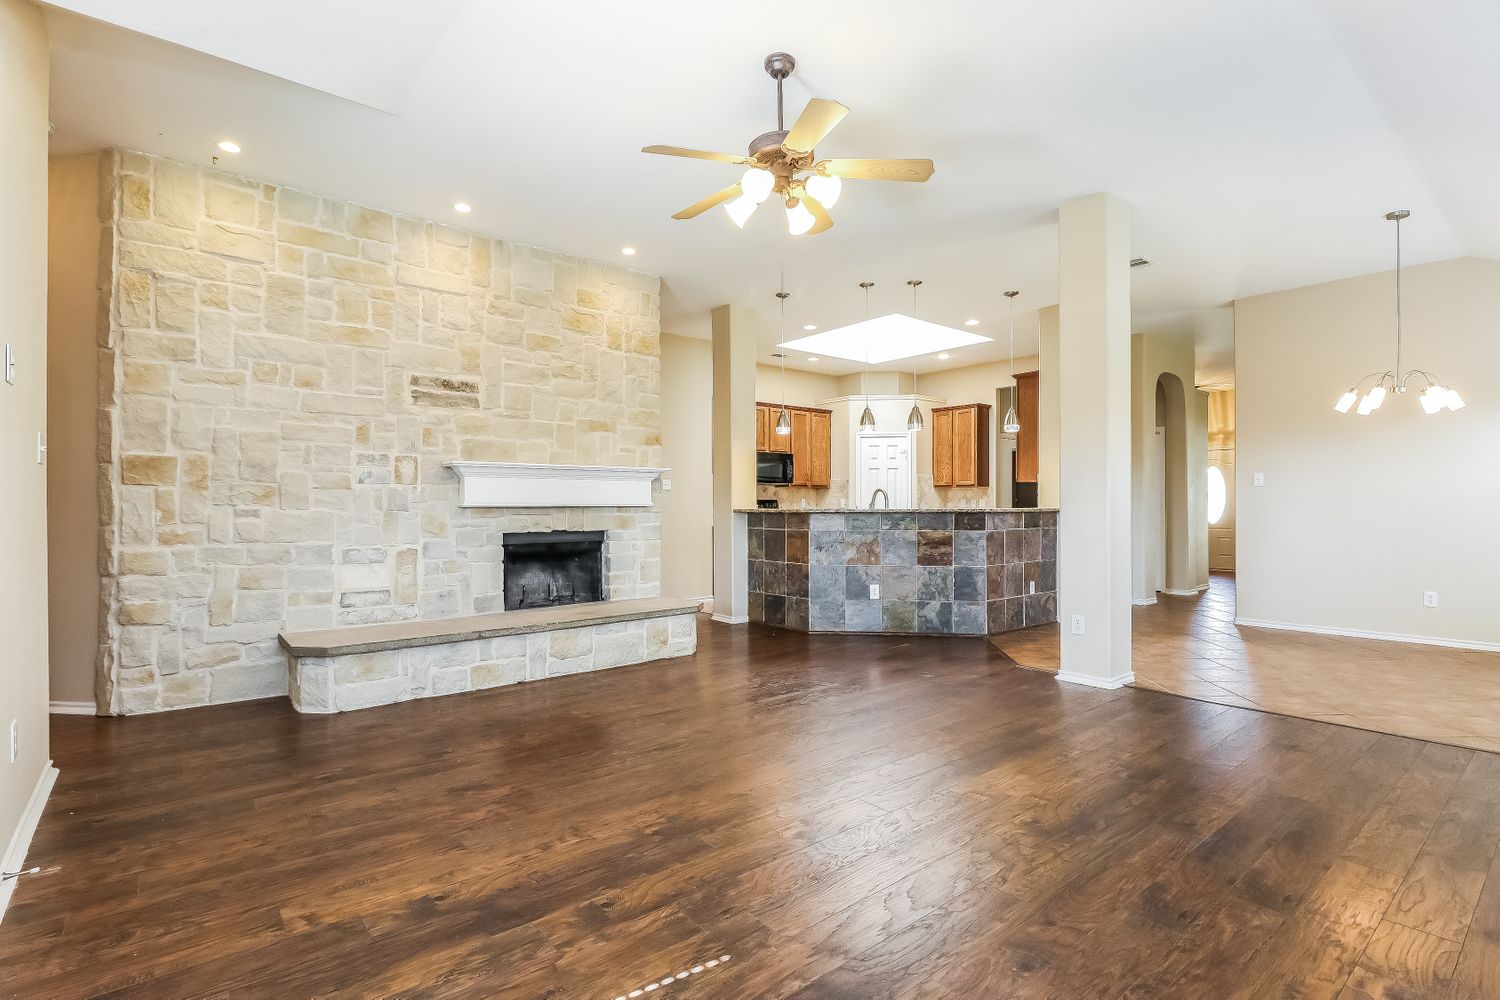 Family room with a large stone fireplace connected to a kitchen with a bar at Invitation Homes Dallas.